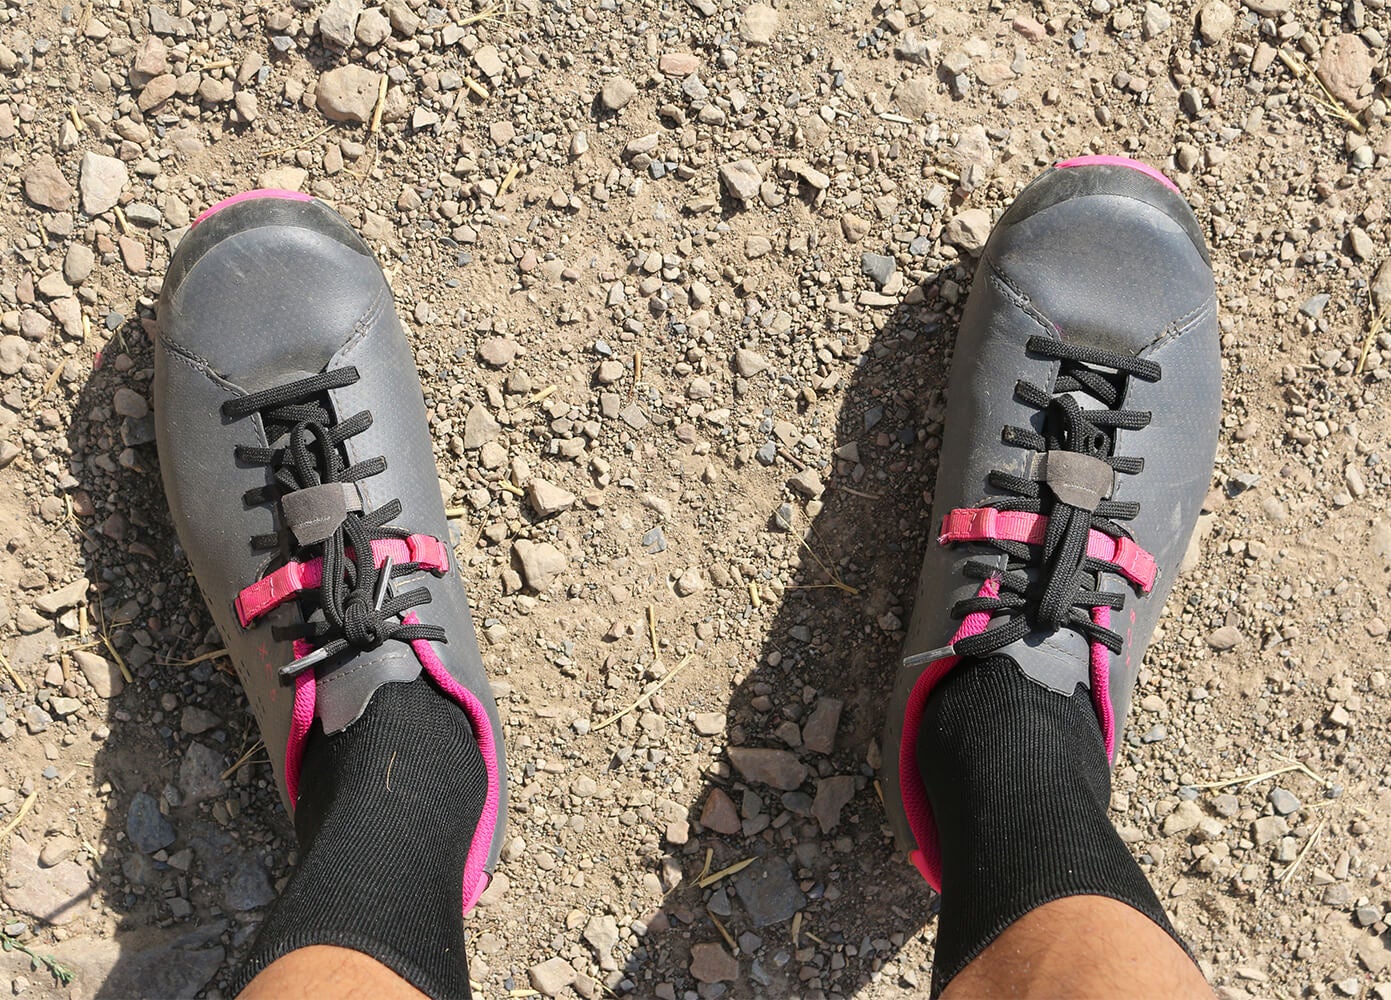 My Sole Mate: An Ode to the Shimano XC5 Shoe (in Review)